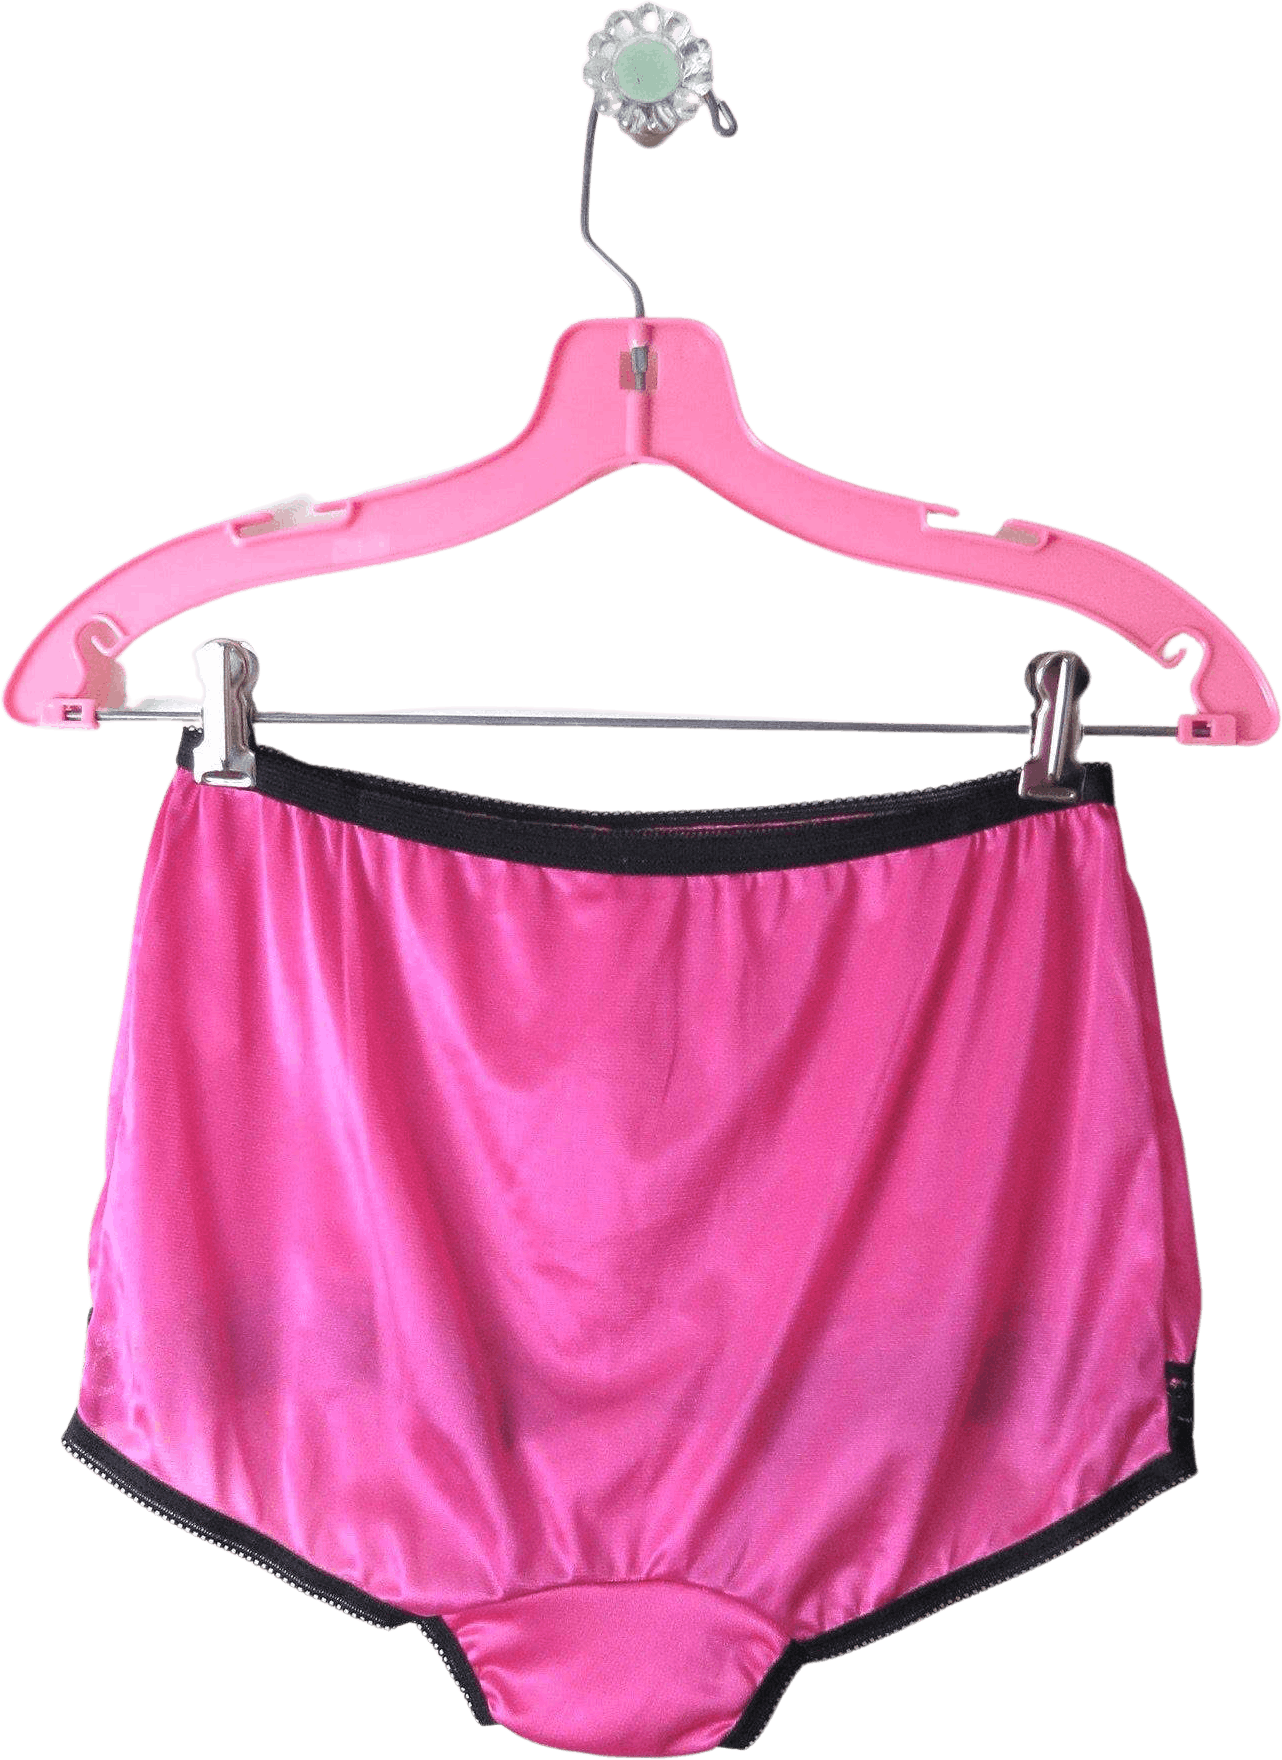 Vintage 50s60s Pink Nylon Panties By Sweet Innocent Nylon Panty Shop Thrilling